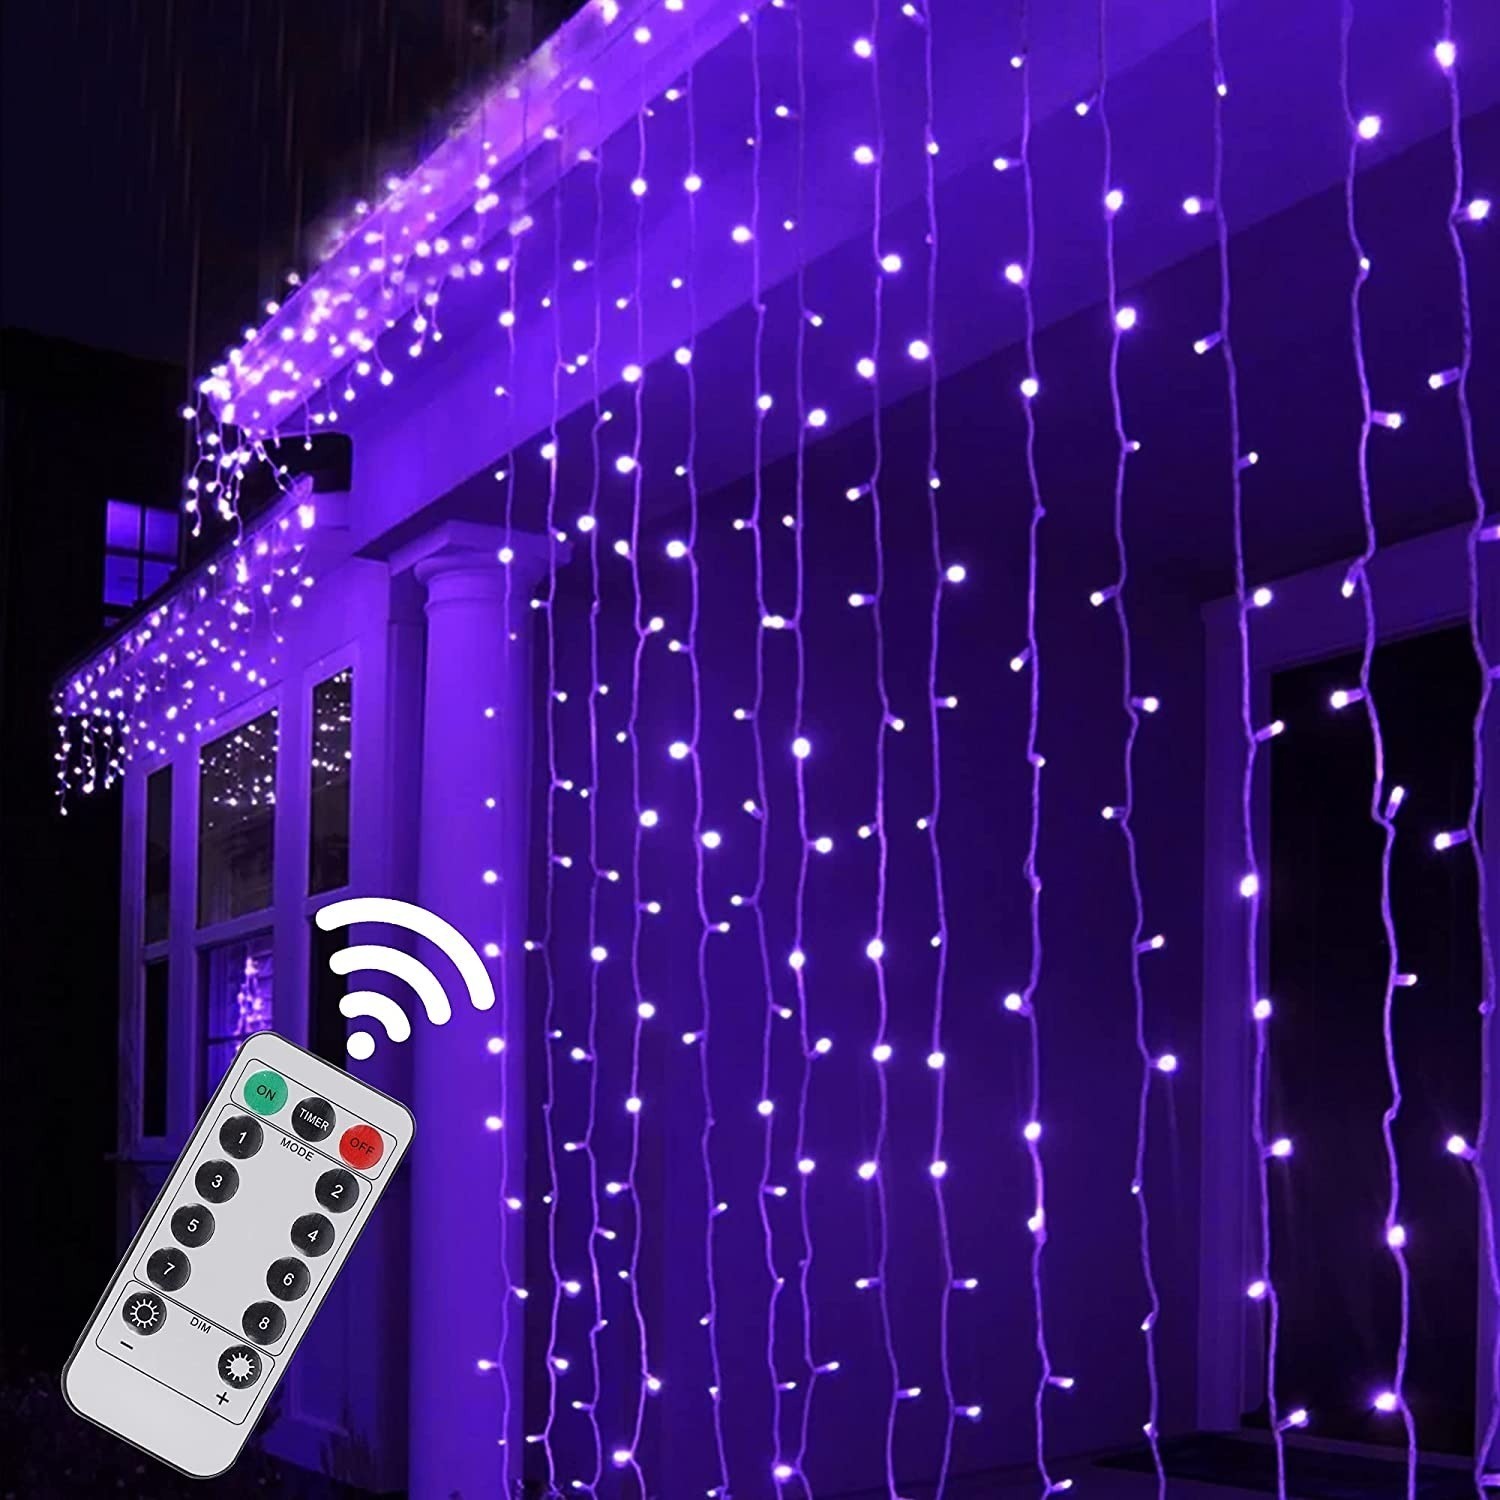 300 LED Halloween Curtain String Lights with Remote Control Timer $8 + Free Shipping w/ Prime or $25+ orders